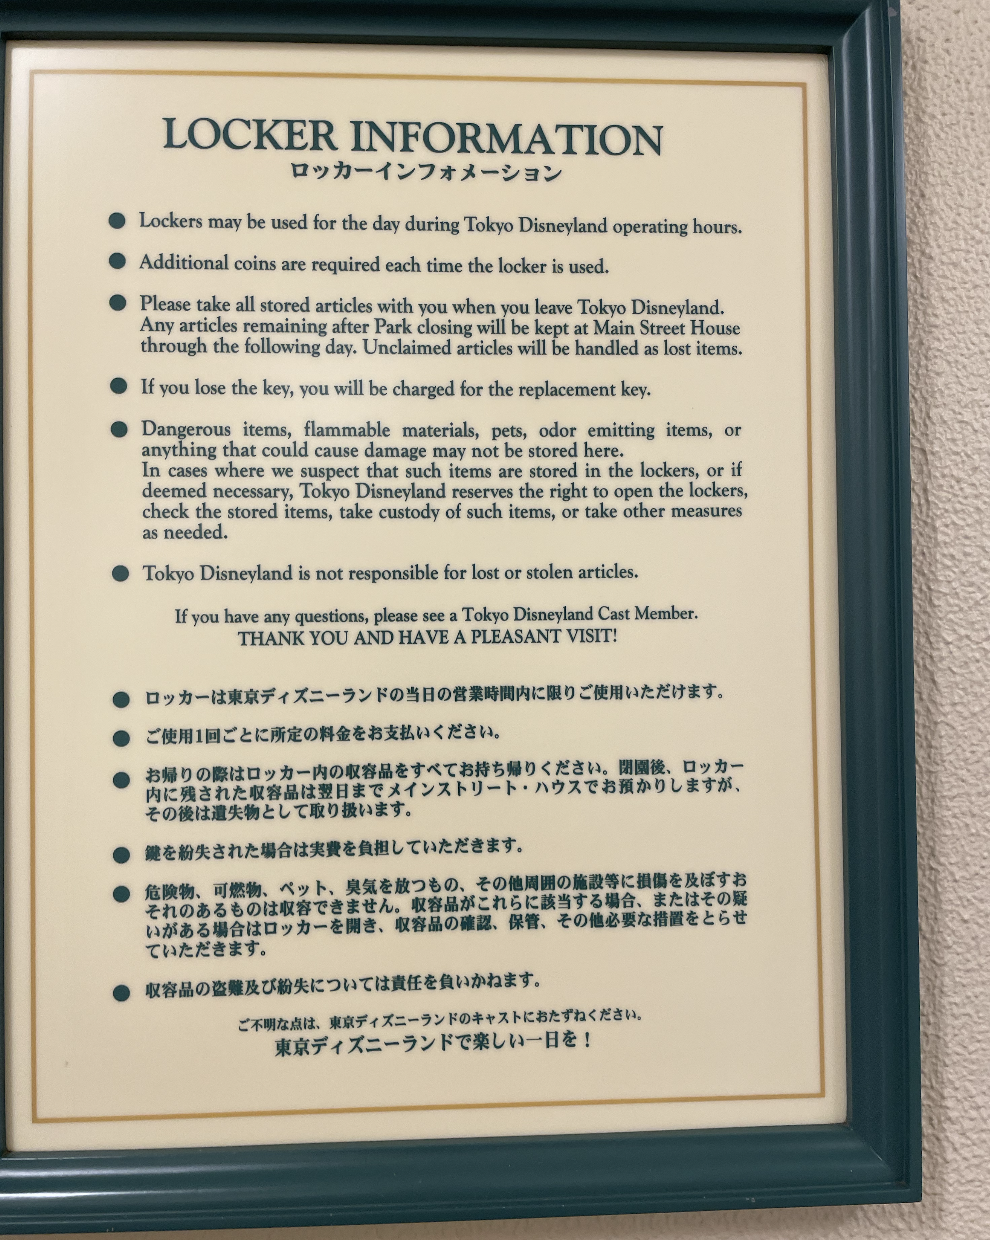 Locker Information sign with rules about locker usage at Tokyo Disneyland. Includes guidelines on storage, fee policy, prohibited items, and liability disclaimer